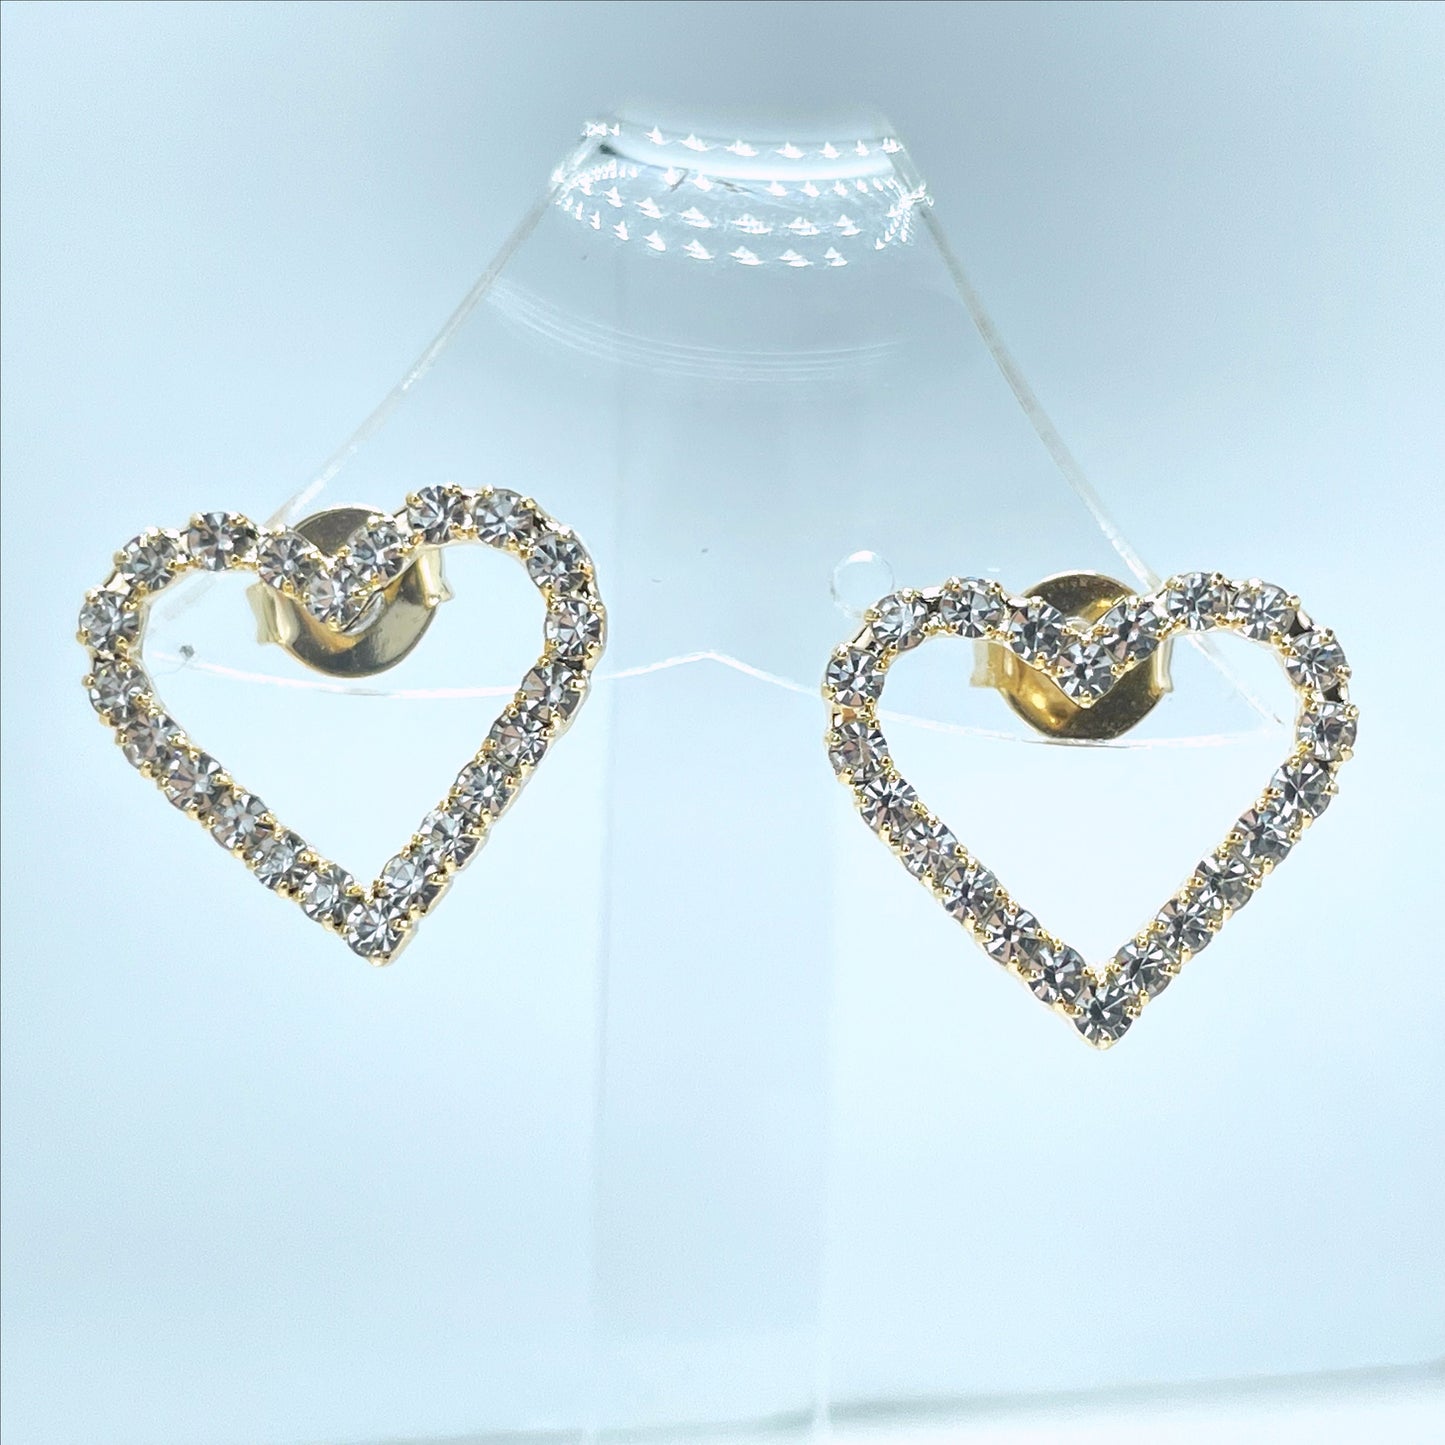 18k Gold Filled or White Gold Filled 1mm Box Chain with CZ Fancy Heart Design Set Necklace & Earrings Wholesale Jewelry Supplies